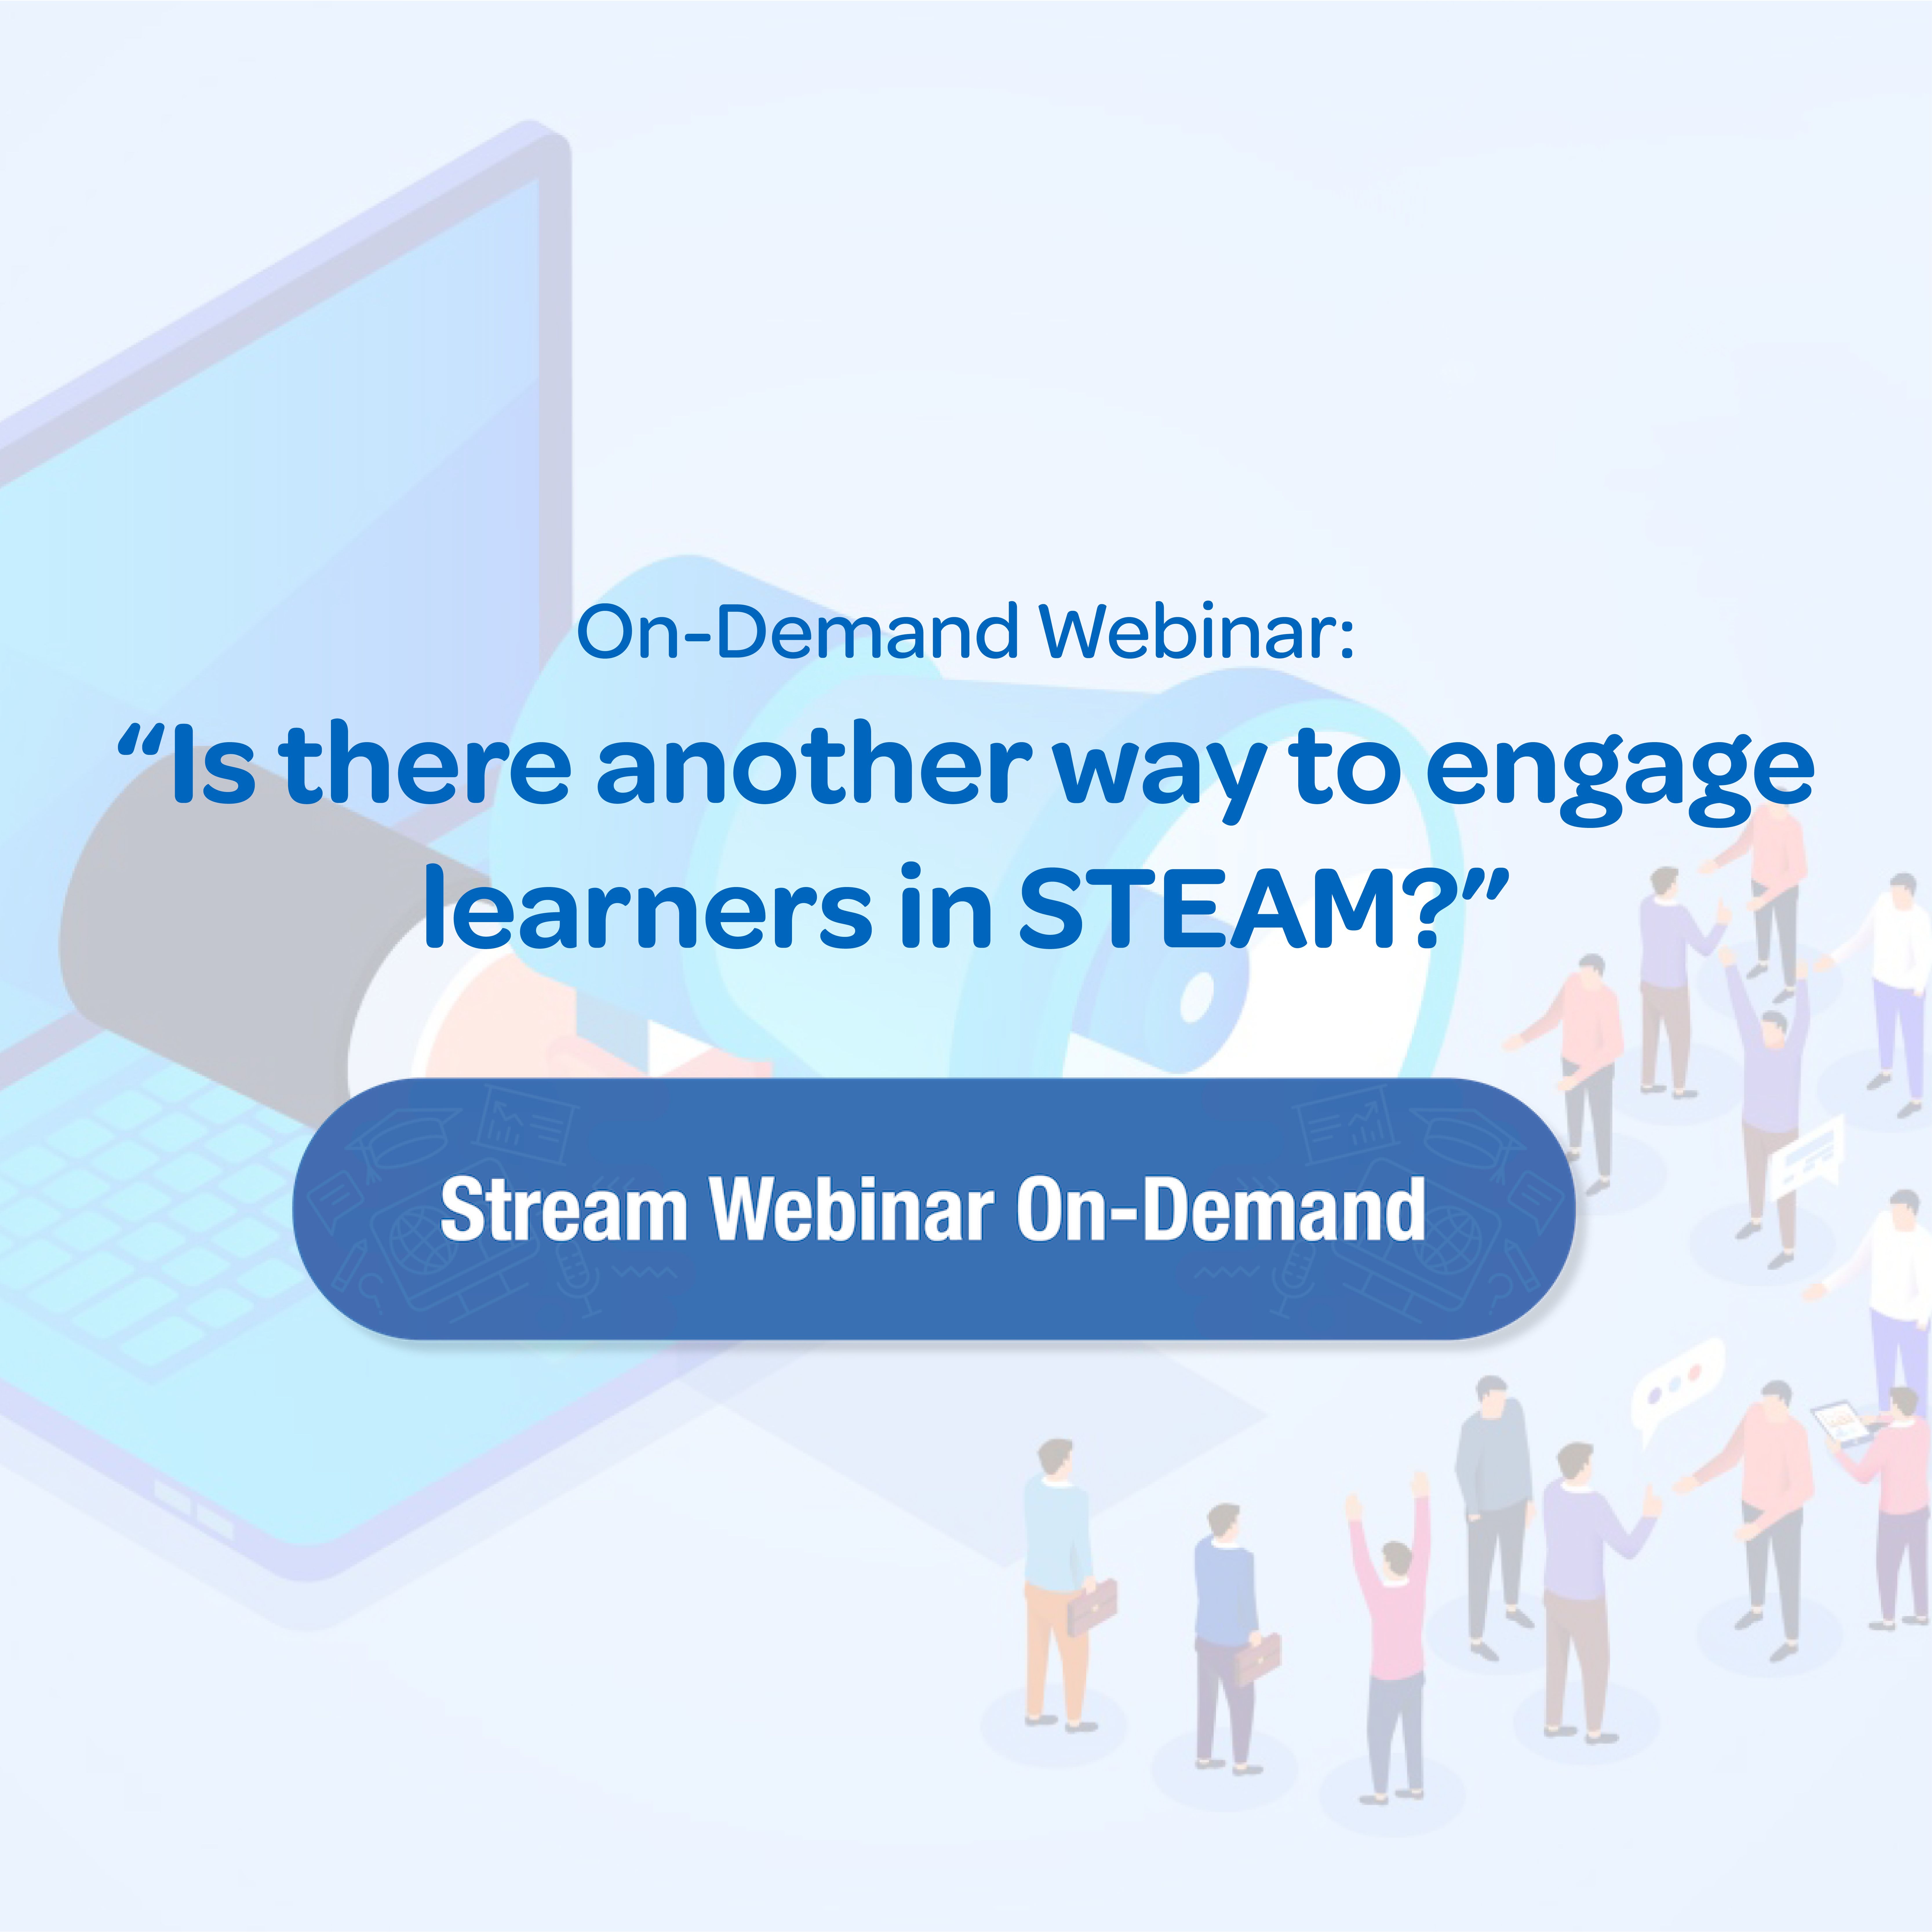 Is there another way to engage learners in STEAM? Webinar